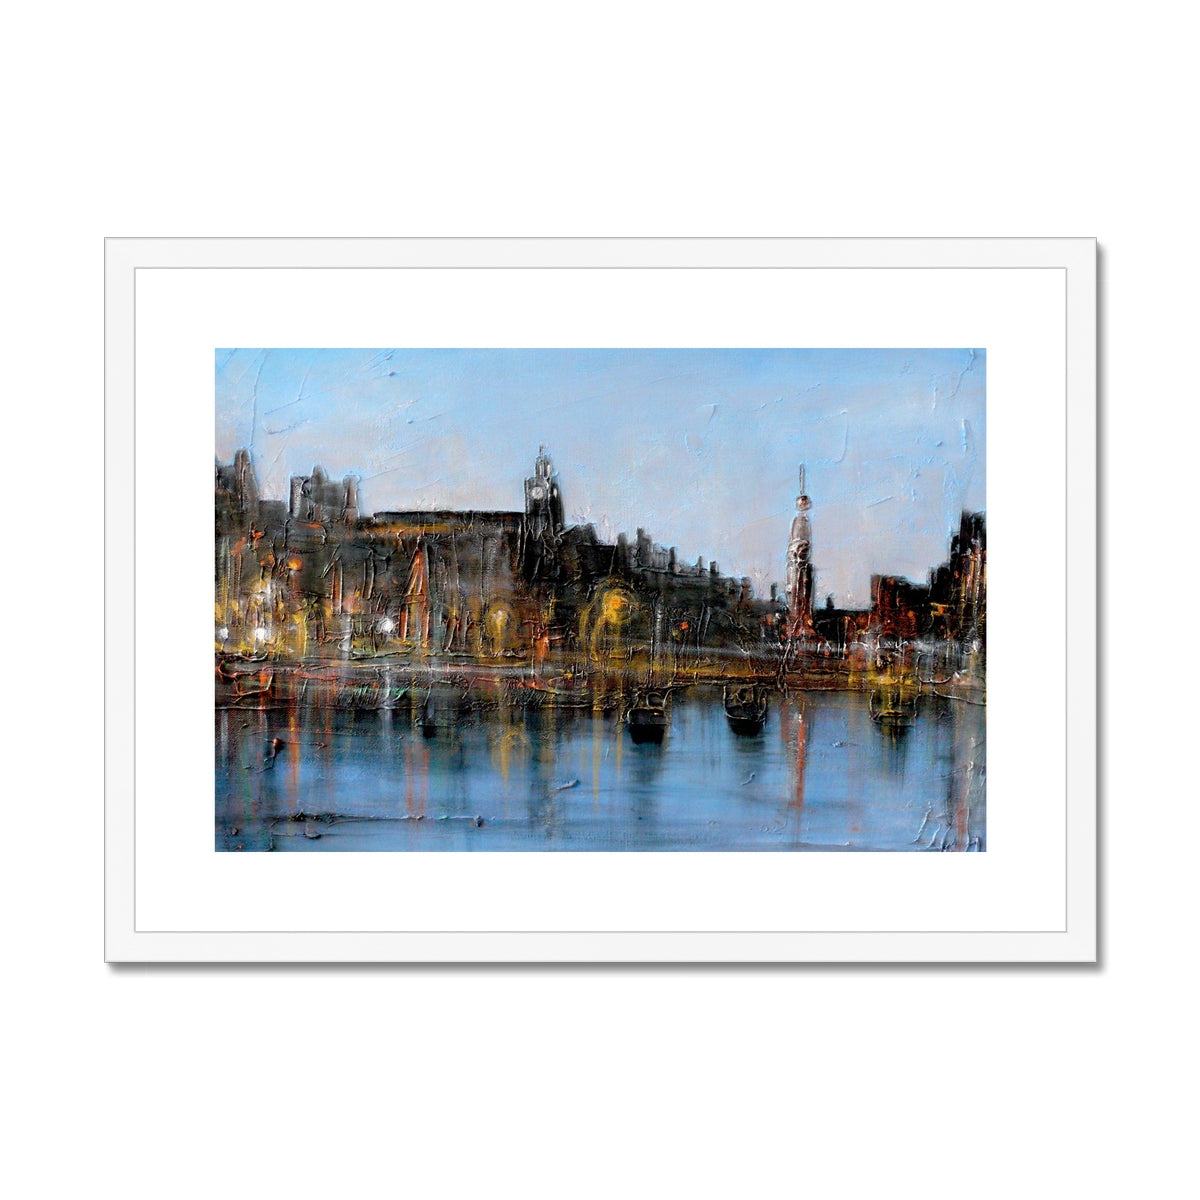 Winter In Amsterdam Painting | Framed & Mounted Prints From Scotland-Framed & Mounted Prints-World Art Gallery-A2 Landscape-White Frame-Paintings, Prints, Homeware, Art Gifts From Scotland By Scottish Artist Kevin Hunter